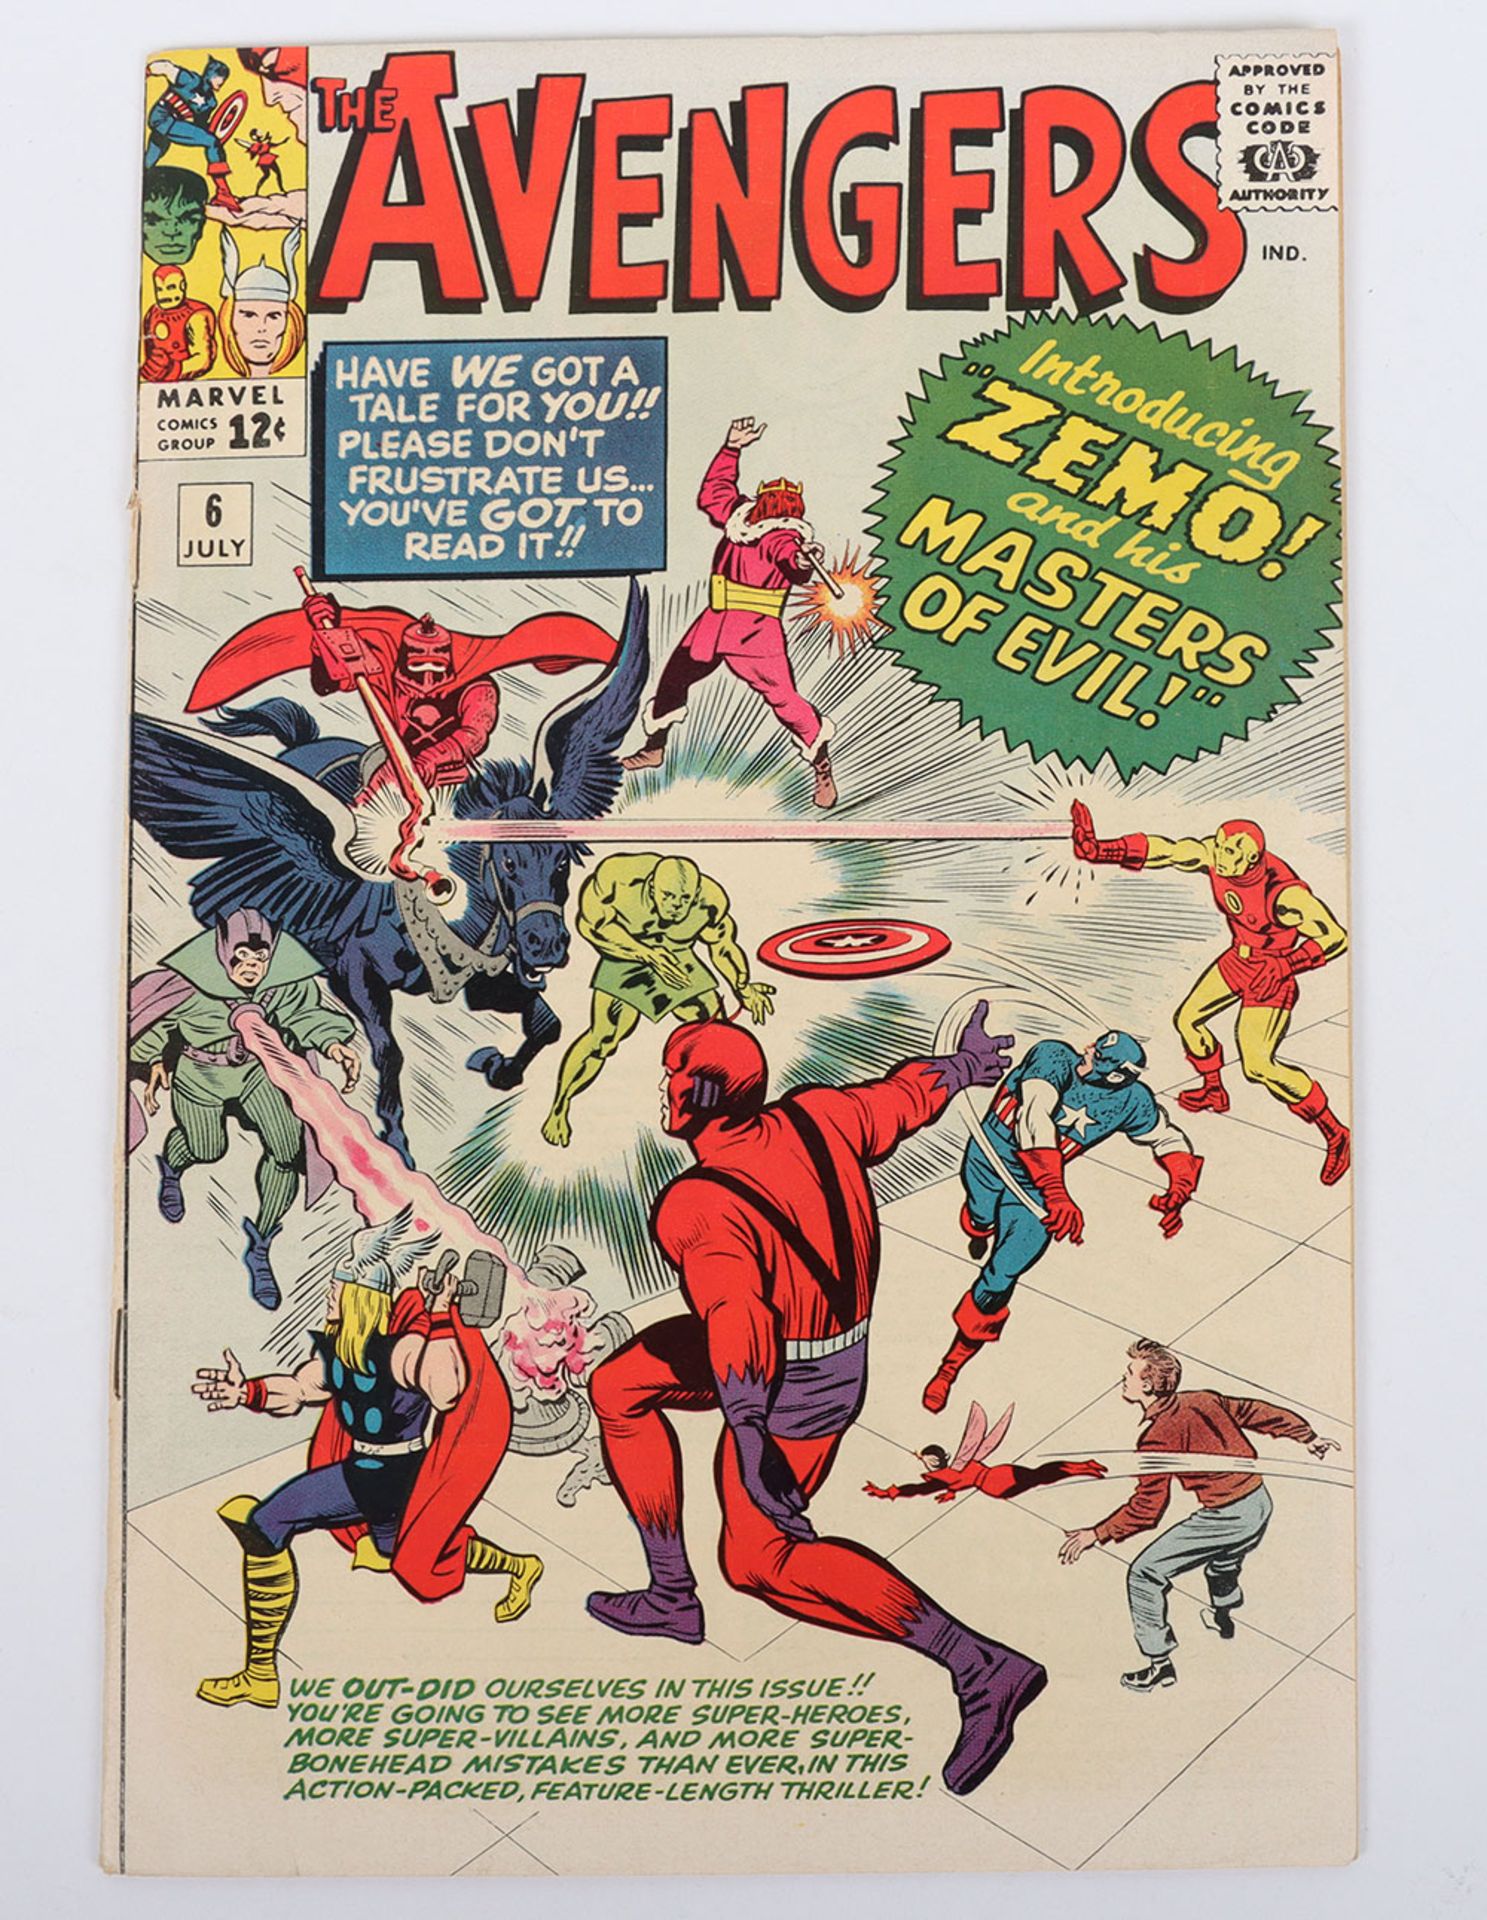 The Avengers No.6  Marvel Silver Age Comics July 1964